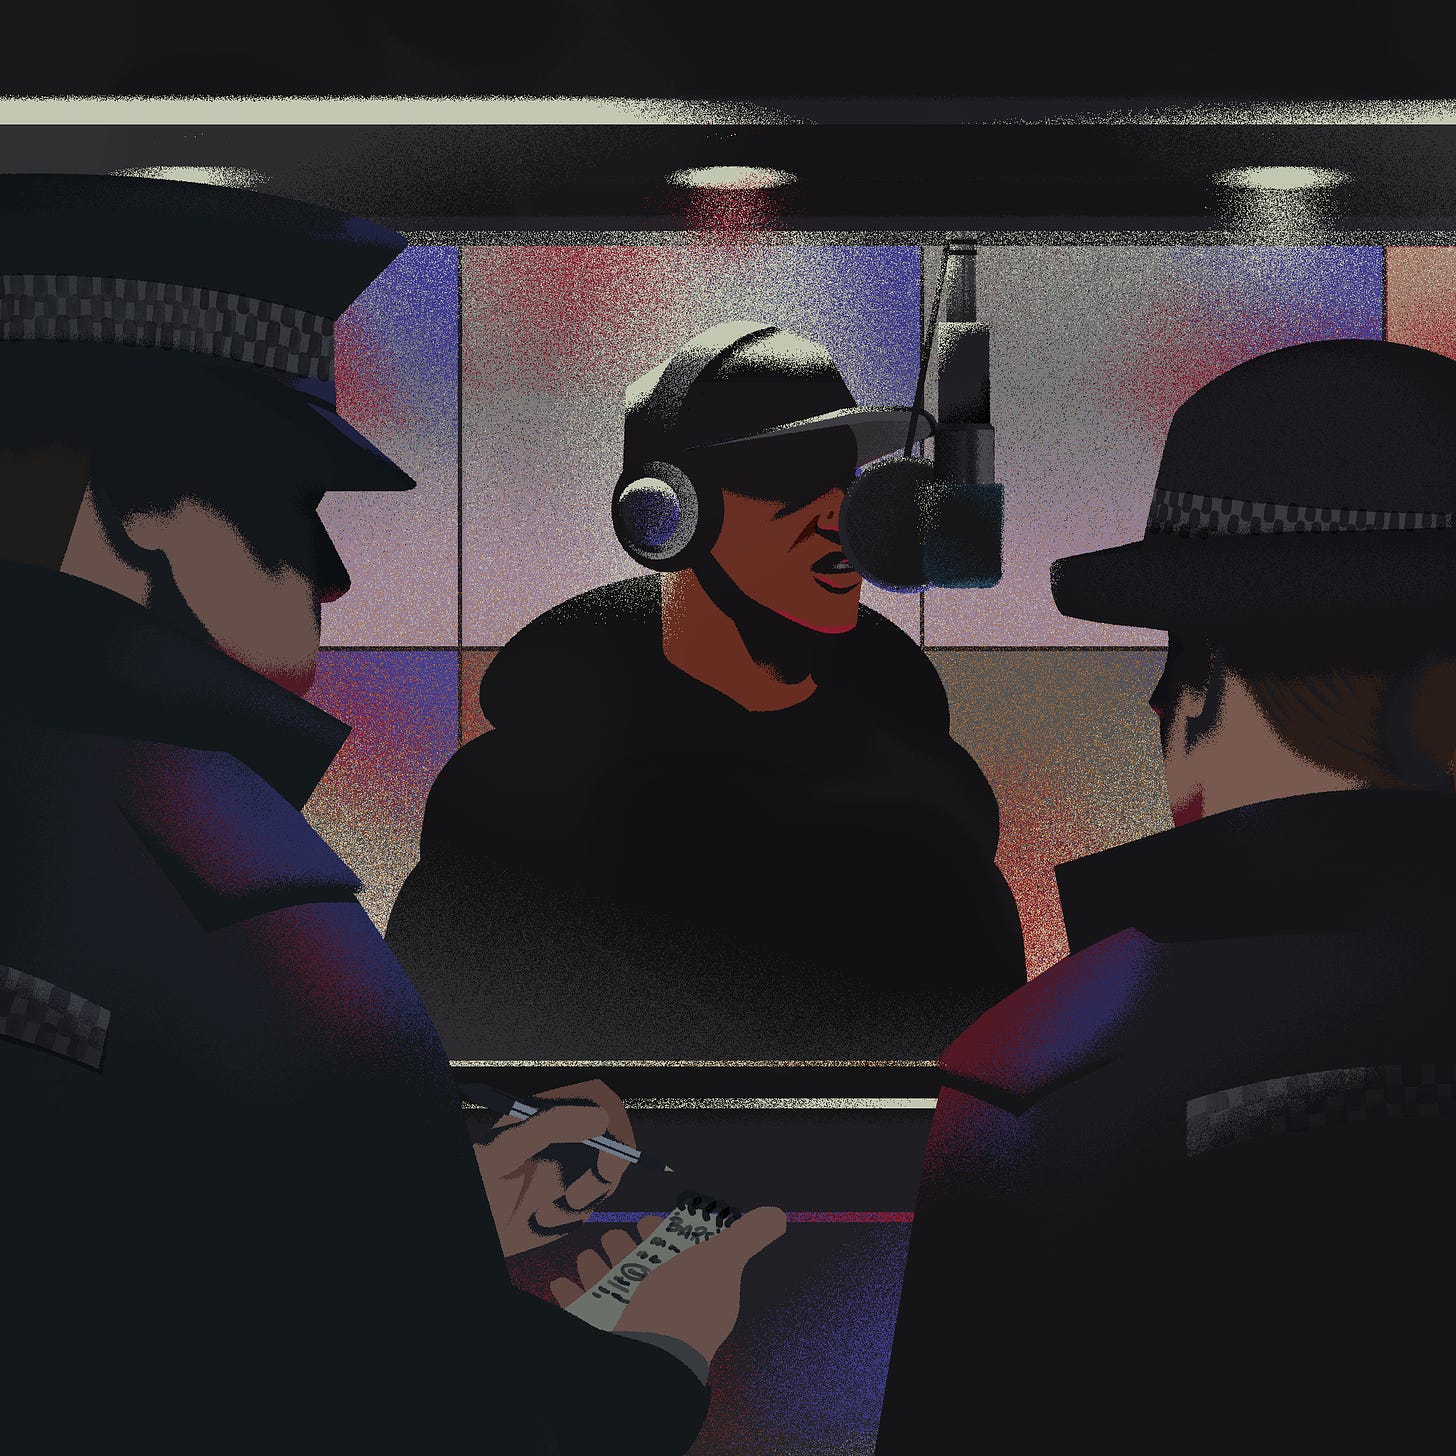 A young man wearing a black hoodie and black baseball hat, wearing headphones, records music in a studio while being watched by one male and one female police officer. The male police officer takes notes on the content of the lyrics.